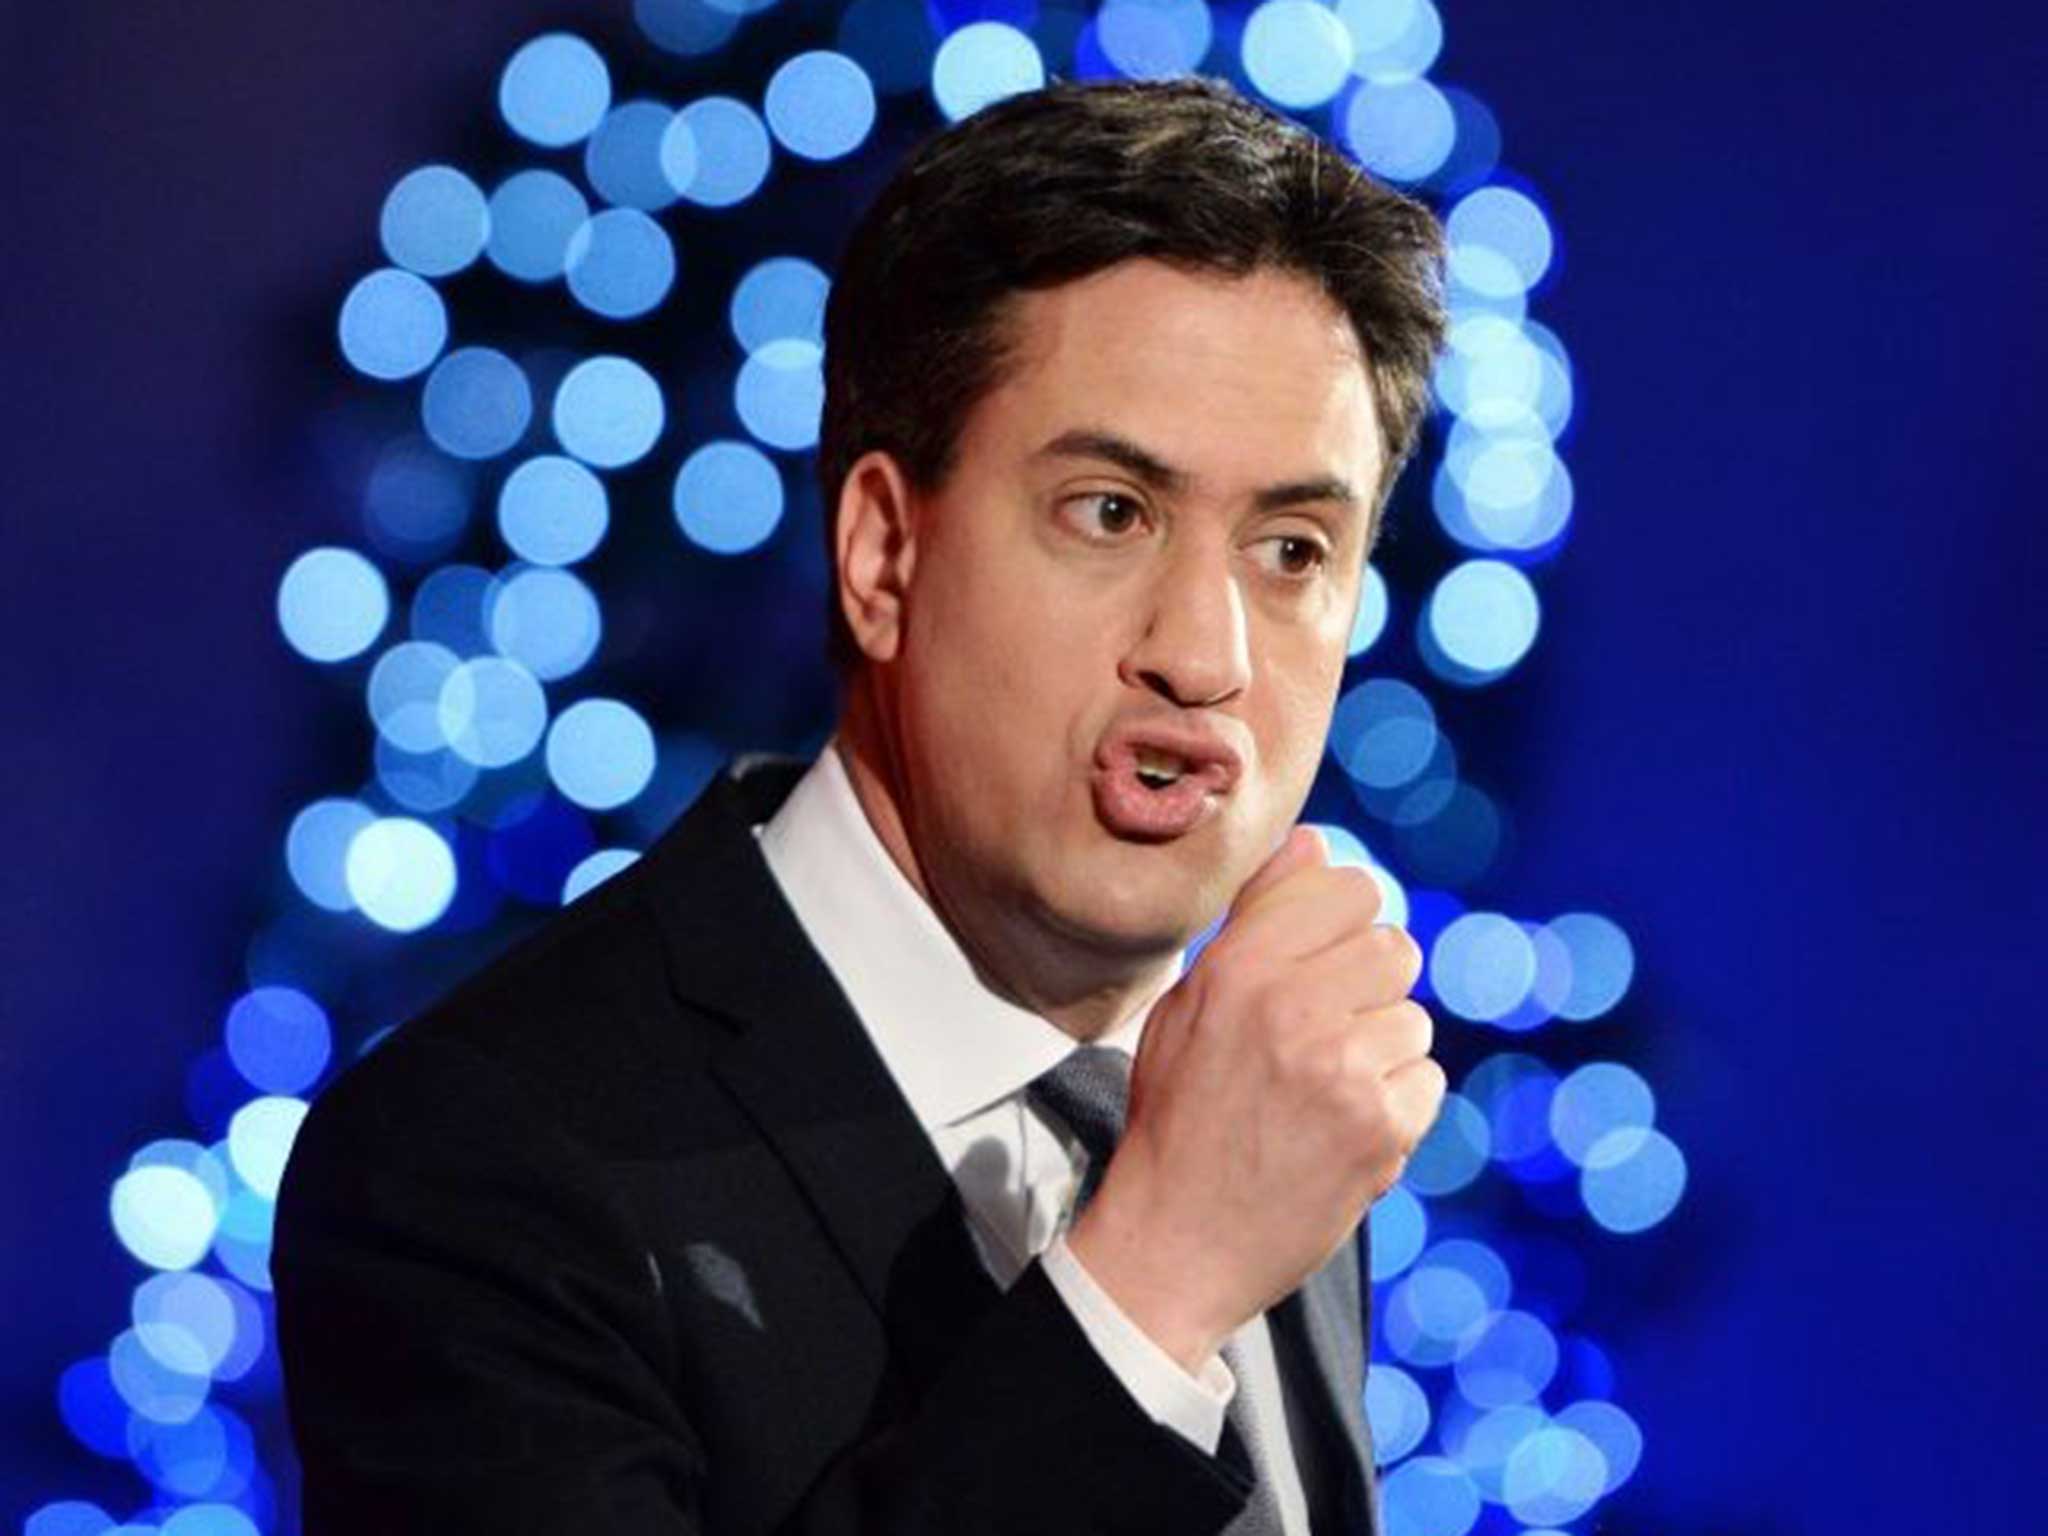 Ed Miliband delivered his long-awaited speech on the economy this week